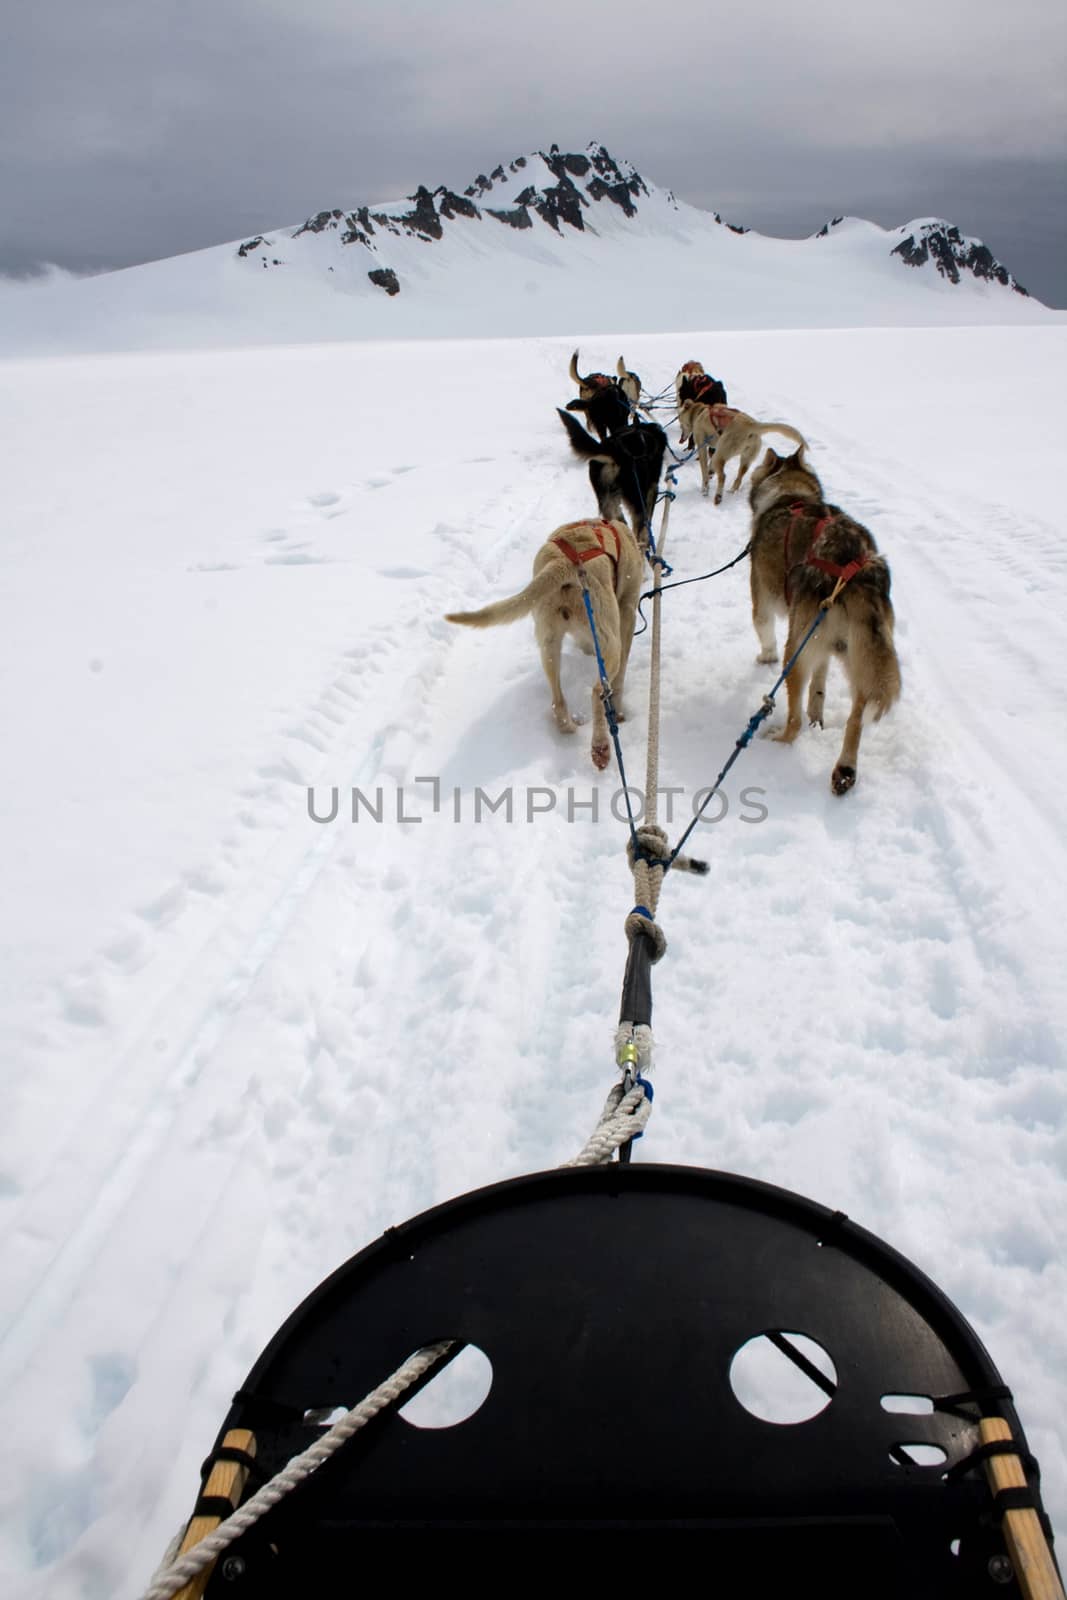 View from Sled Pulled by Dogs on Snow by NikkiGensert